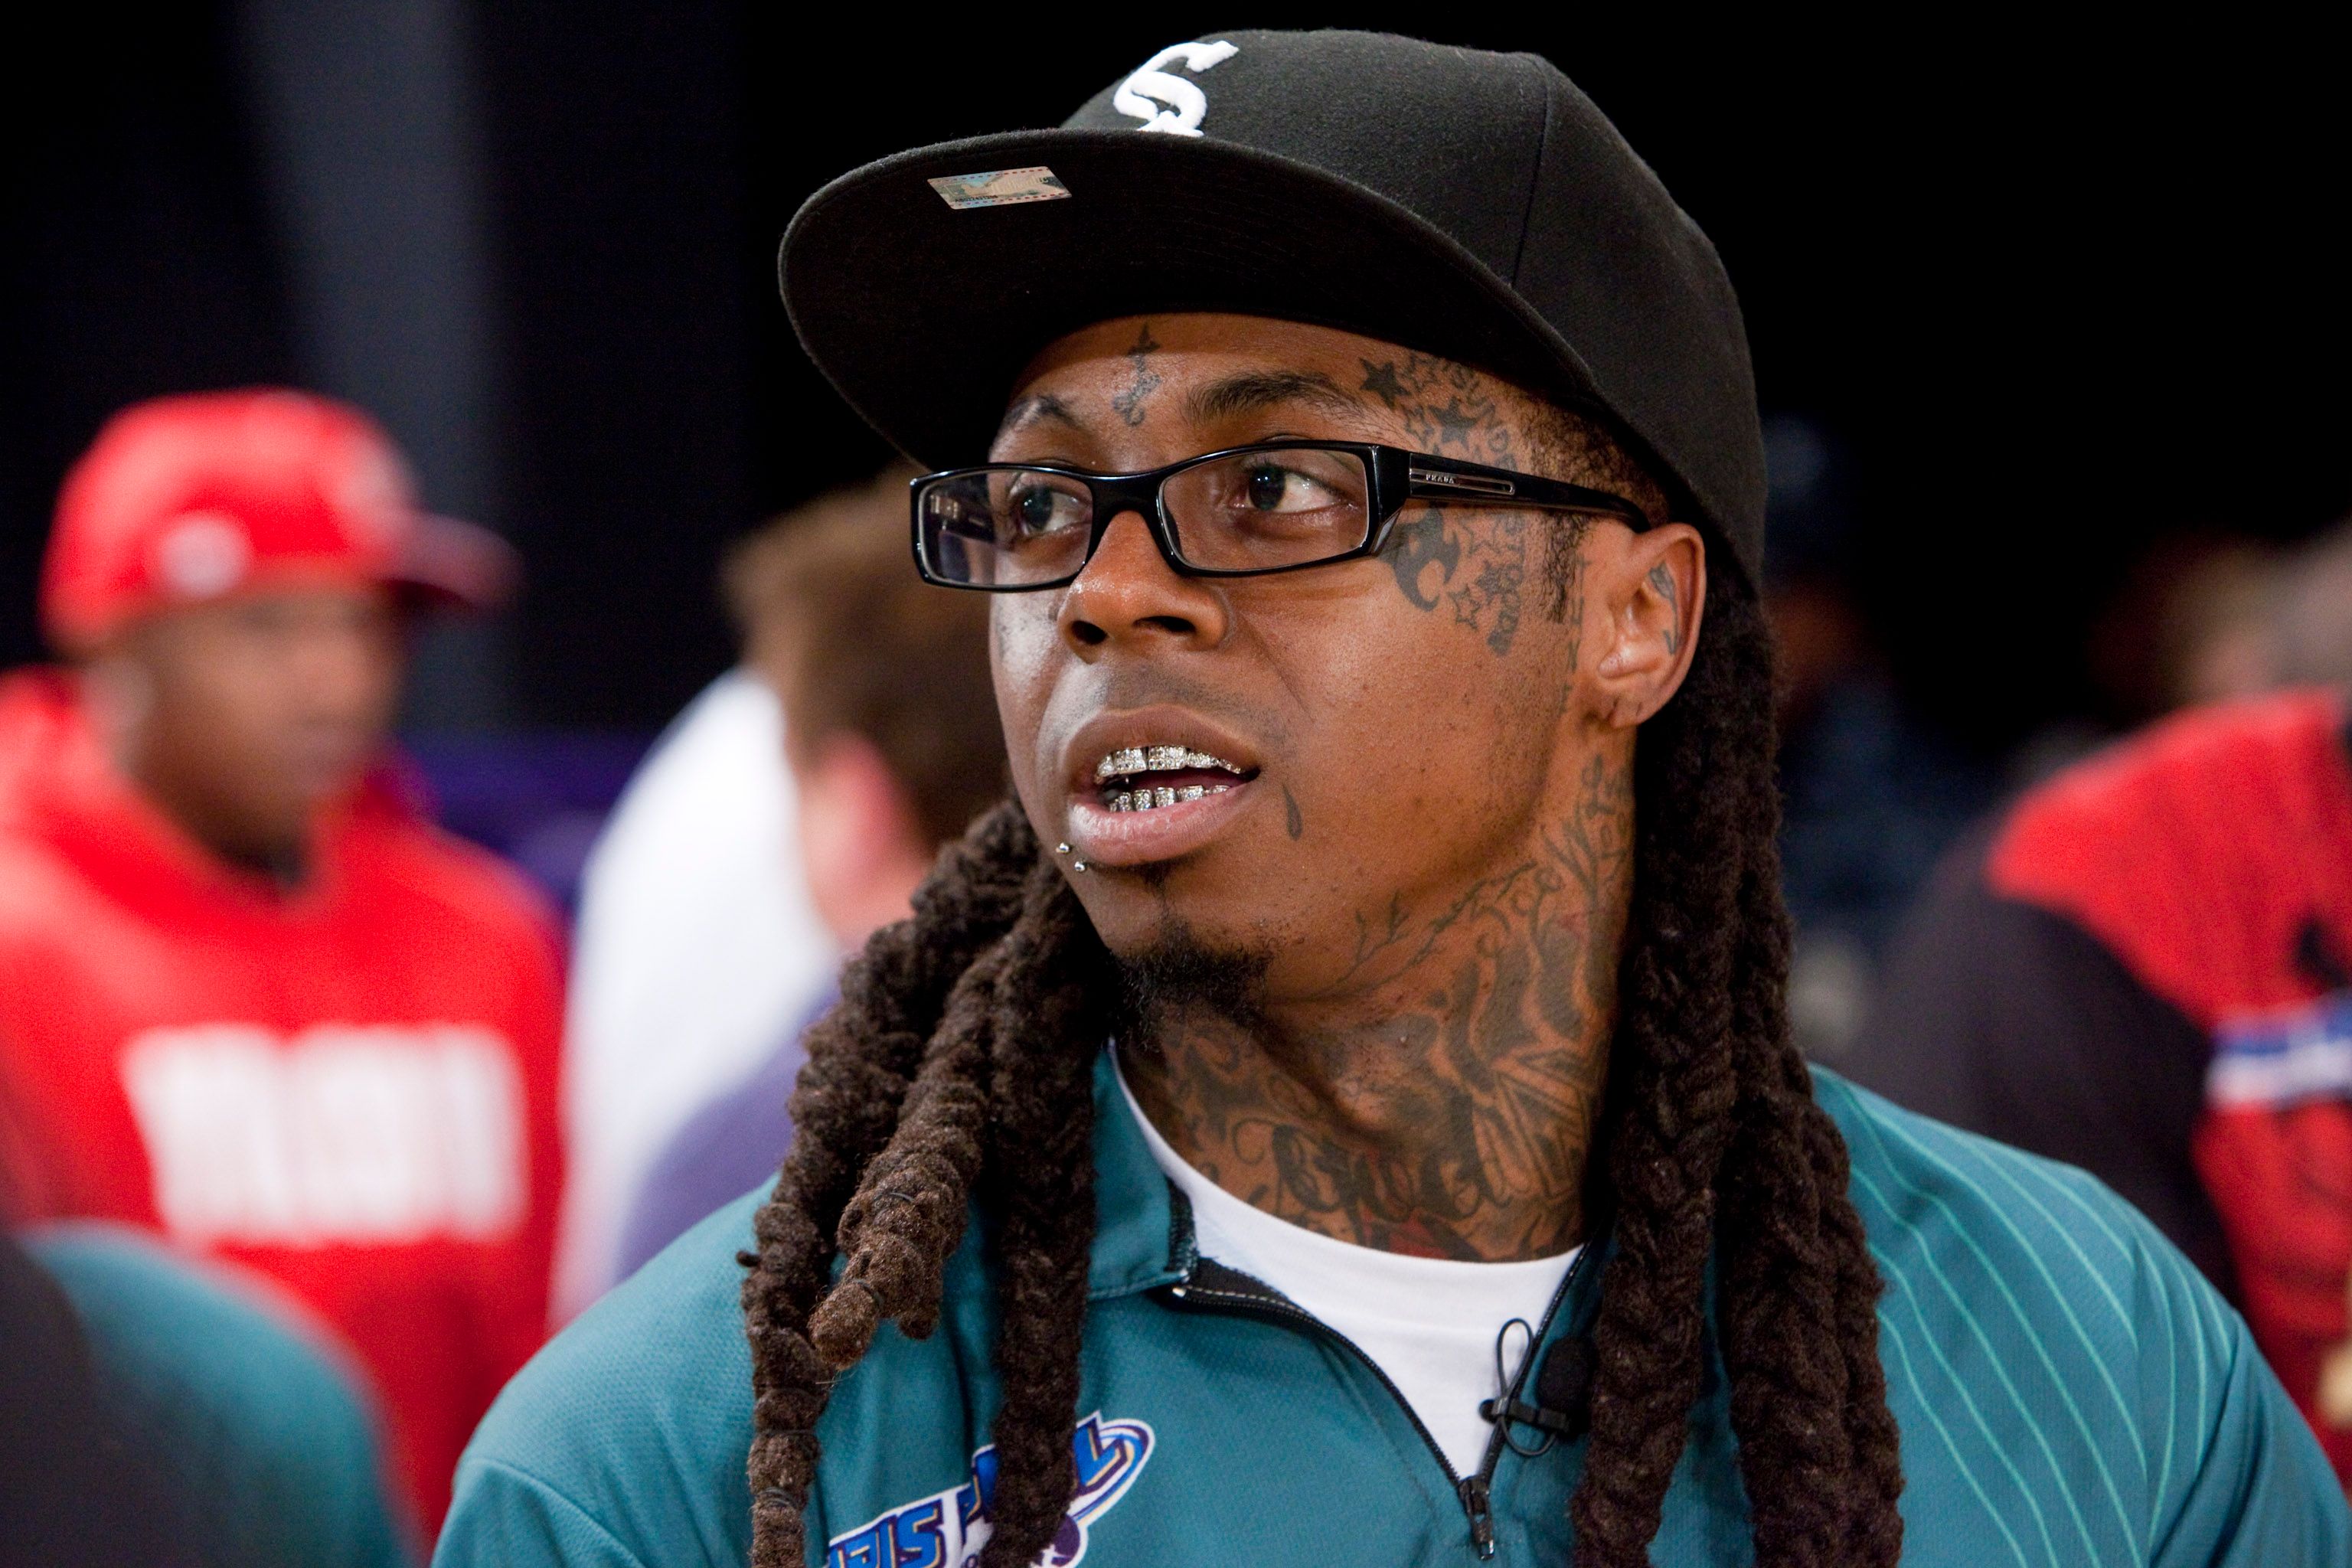 Aggregate 65+ lil wayne without tattoo super hot in.cdgdbentre